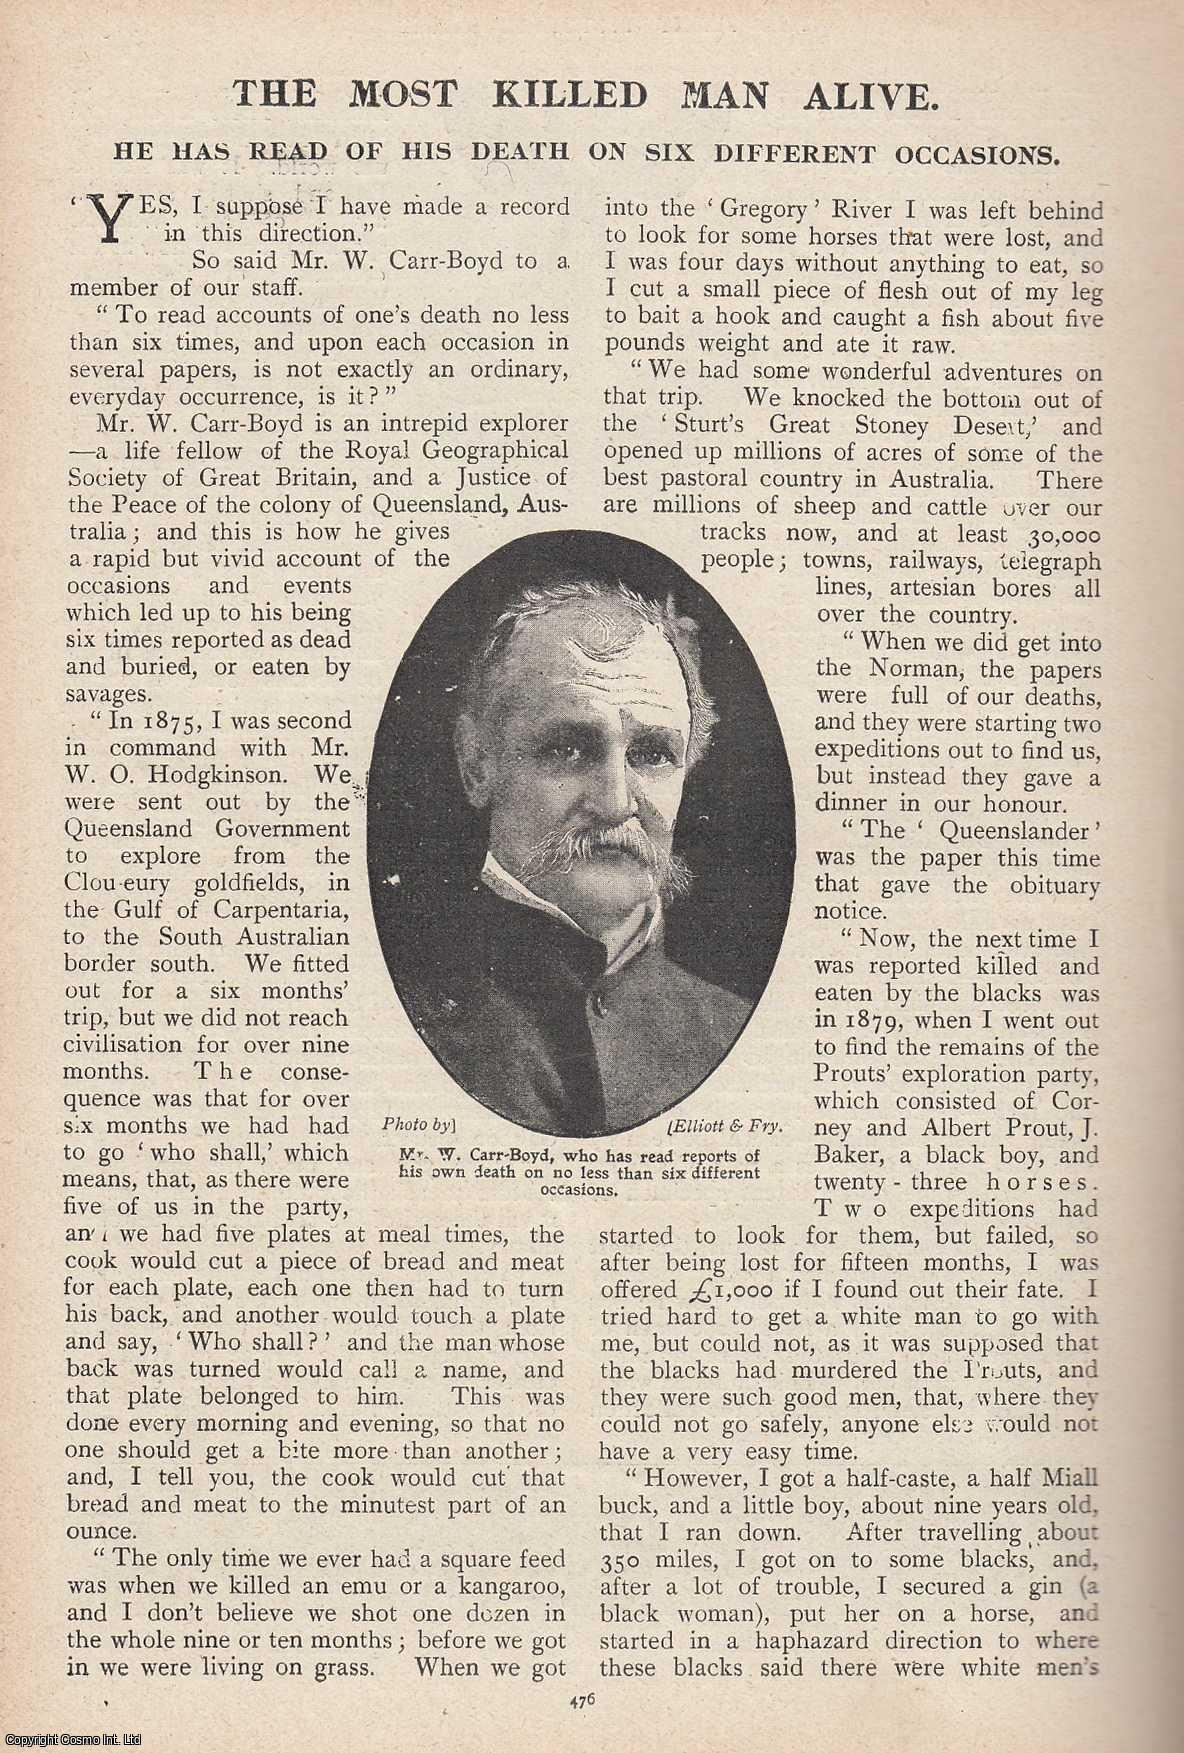 Penny Pictorial Magazine - The Most Killed Man Alive, Mr. W. Carr-Boyd, fellow of the Royal Geographical Society. He has read of his death on six different occasions.. This is an original article from the Penny Pictorial Magazine, 1899.